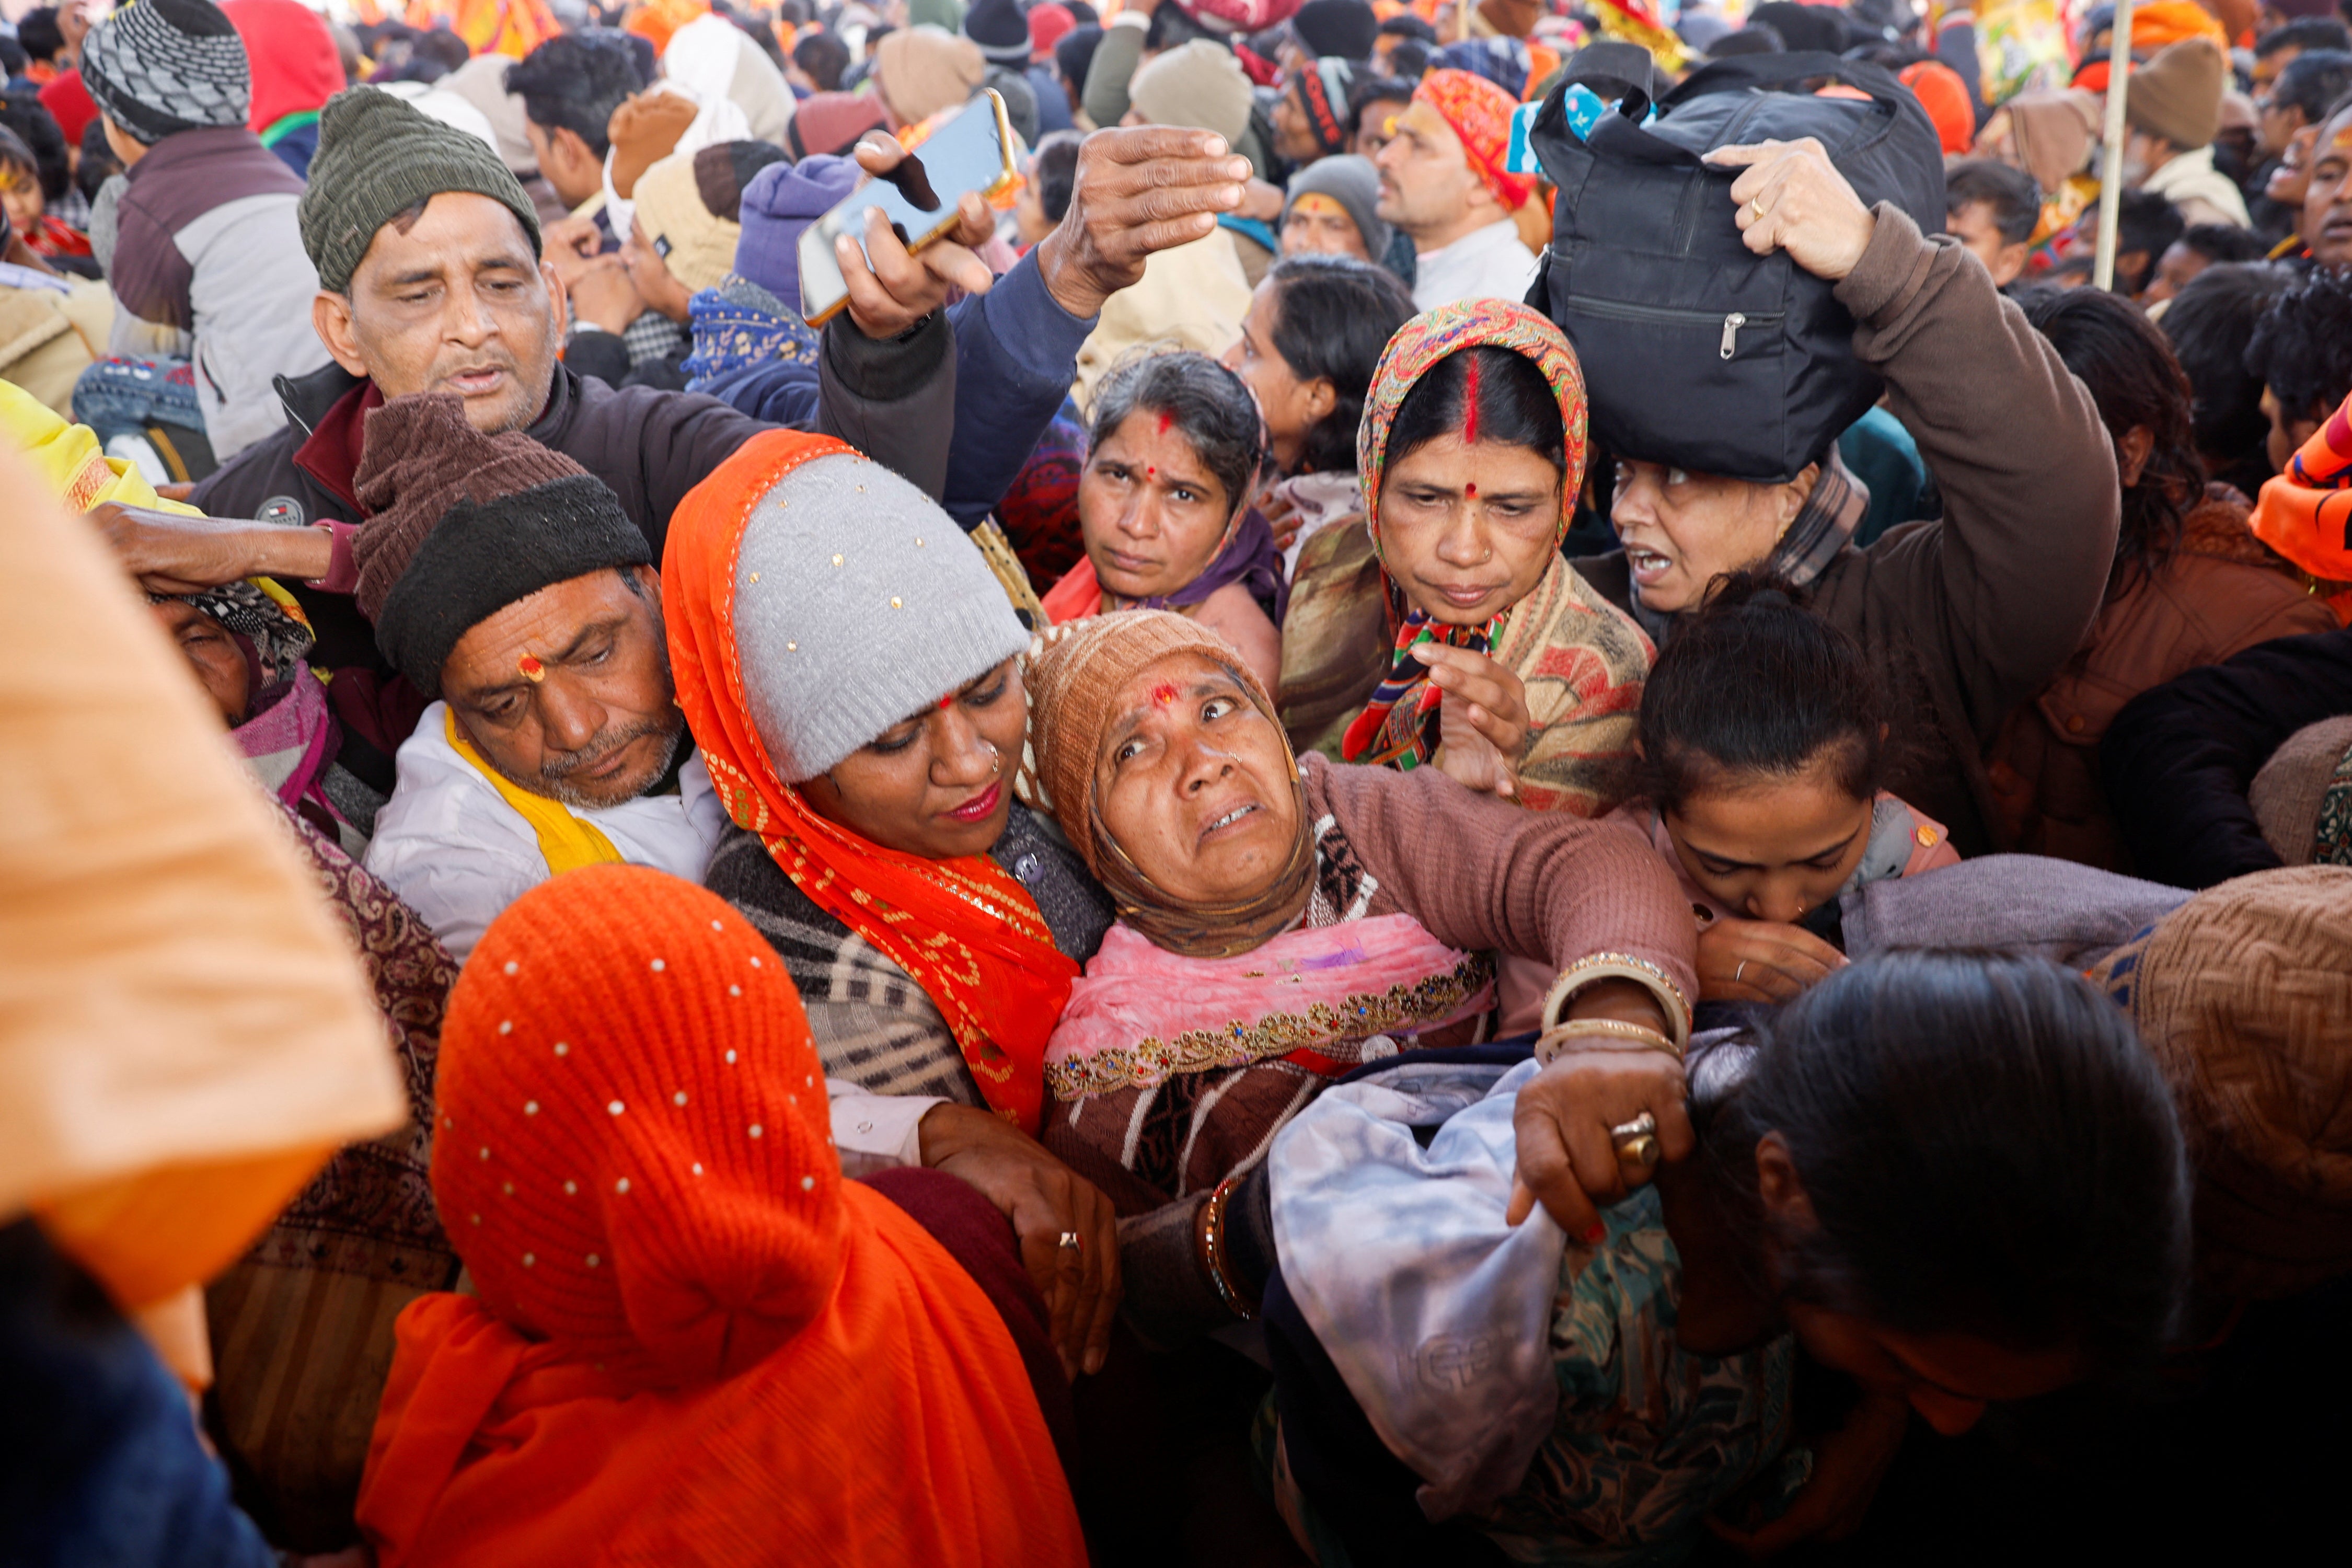 Some devotees fell during the surge of people trying to get inside